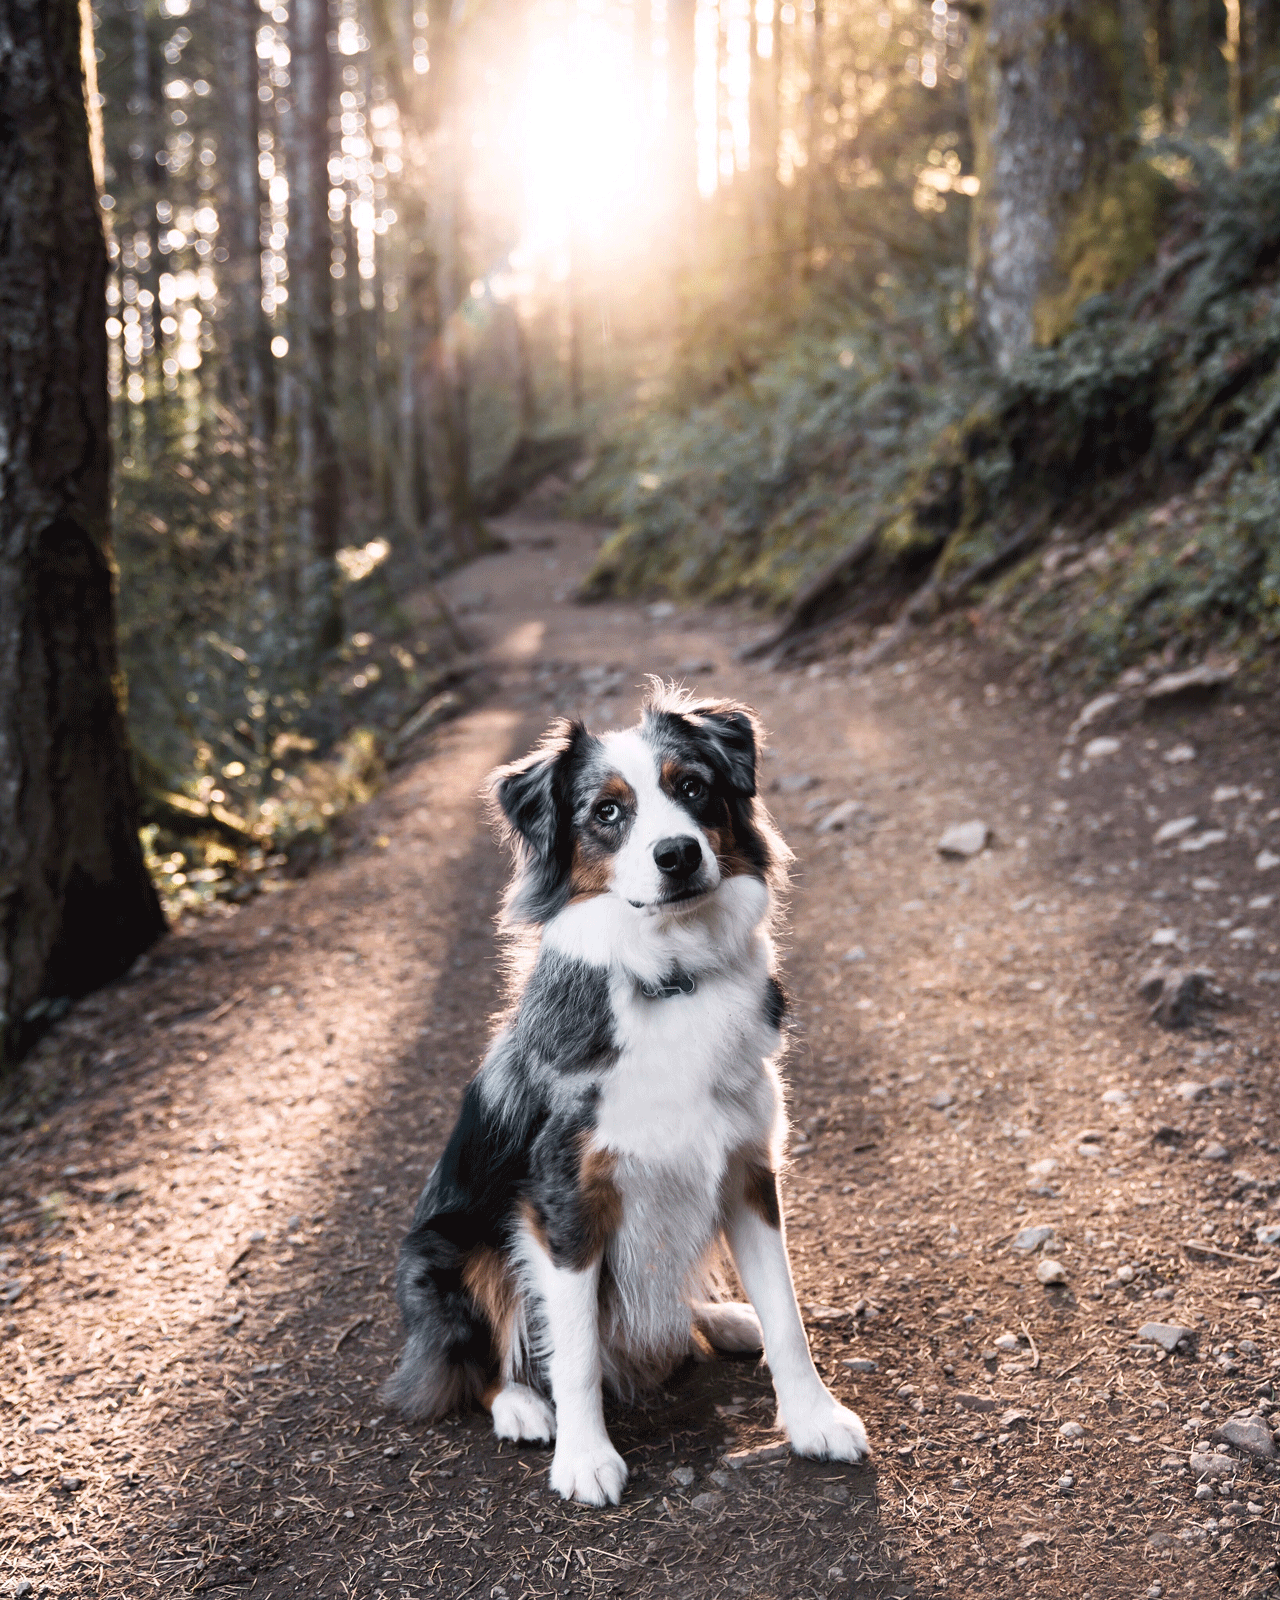 A dog with a tricolor coat sits obediently on a forest path. The path is surrounded by tall trees, and sunlight filters through the dense foliage, creating a serene, sunlit atmosphere. The dog looks attentive and calm.